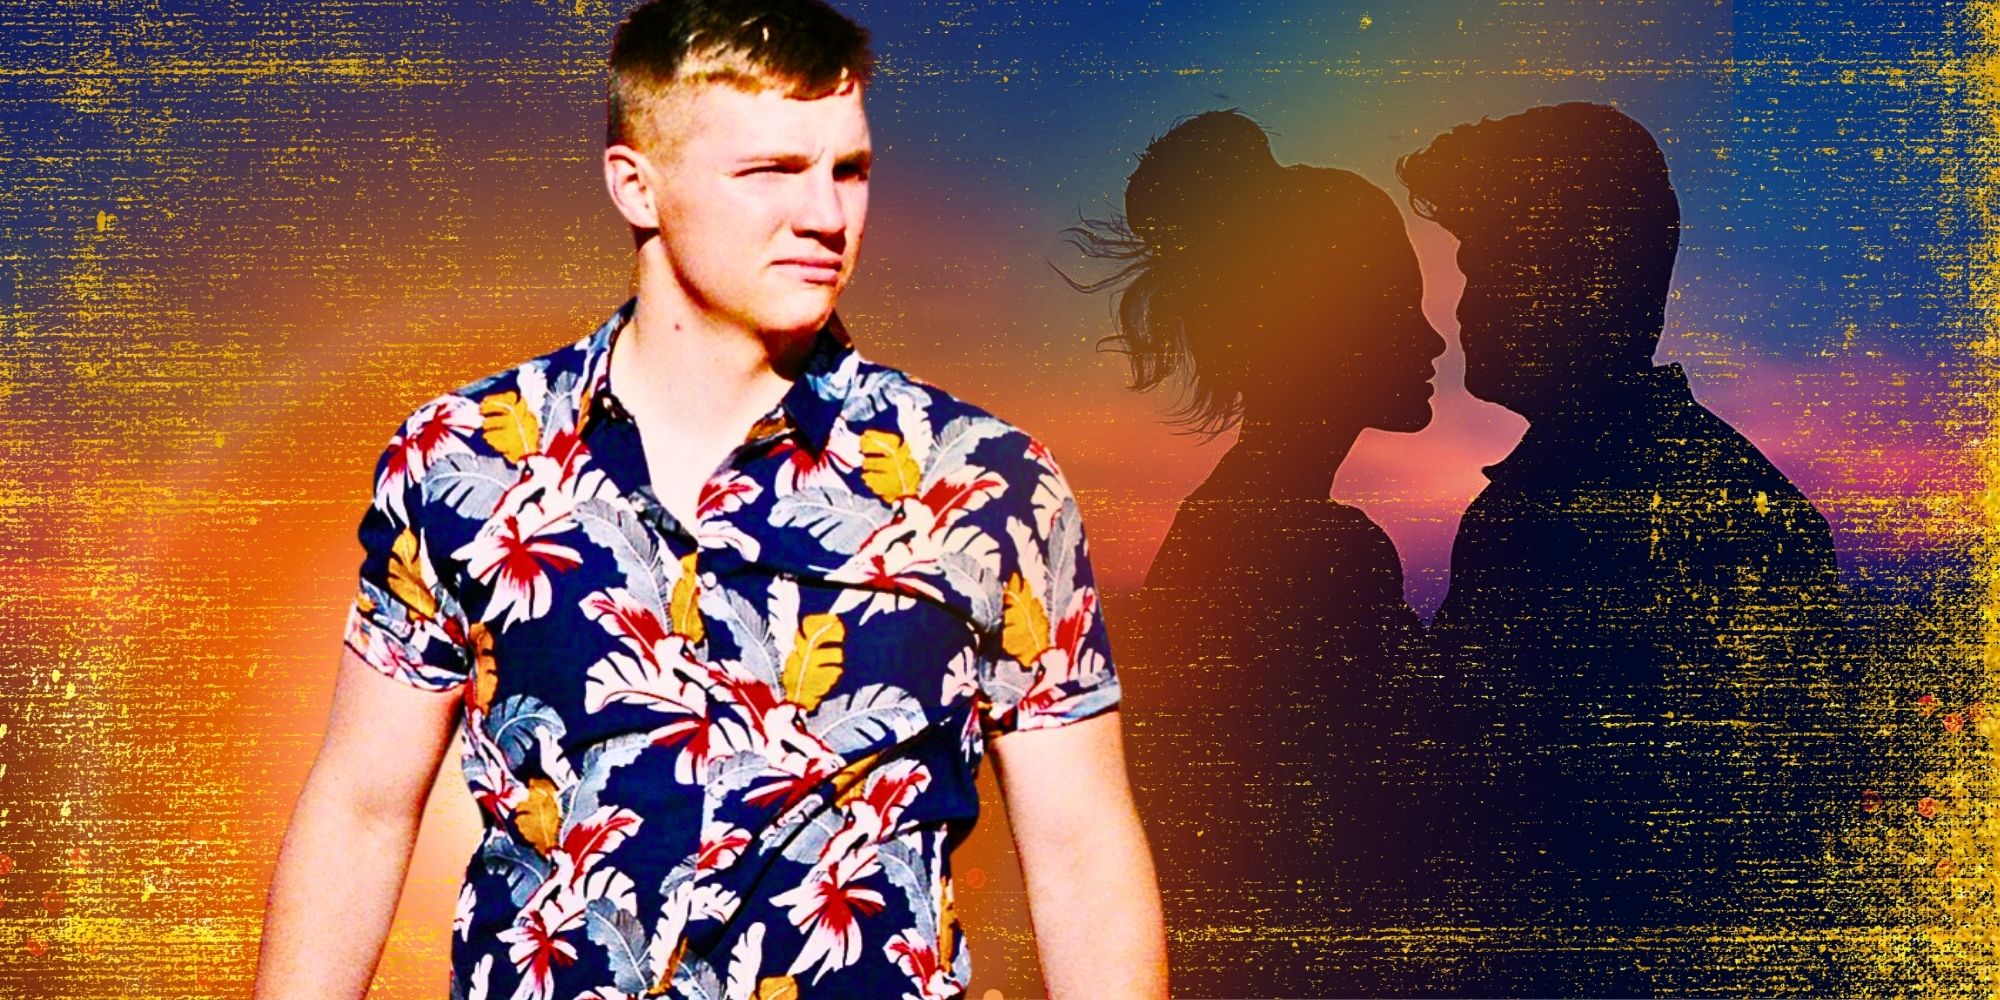  Sister wives garrison brown with silhouette of him and his girlfriend 